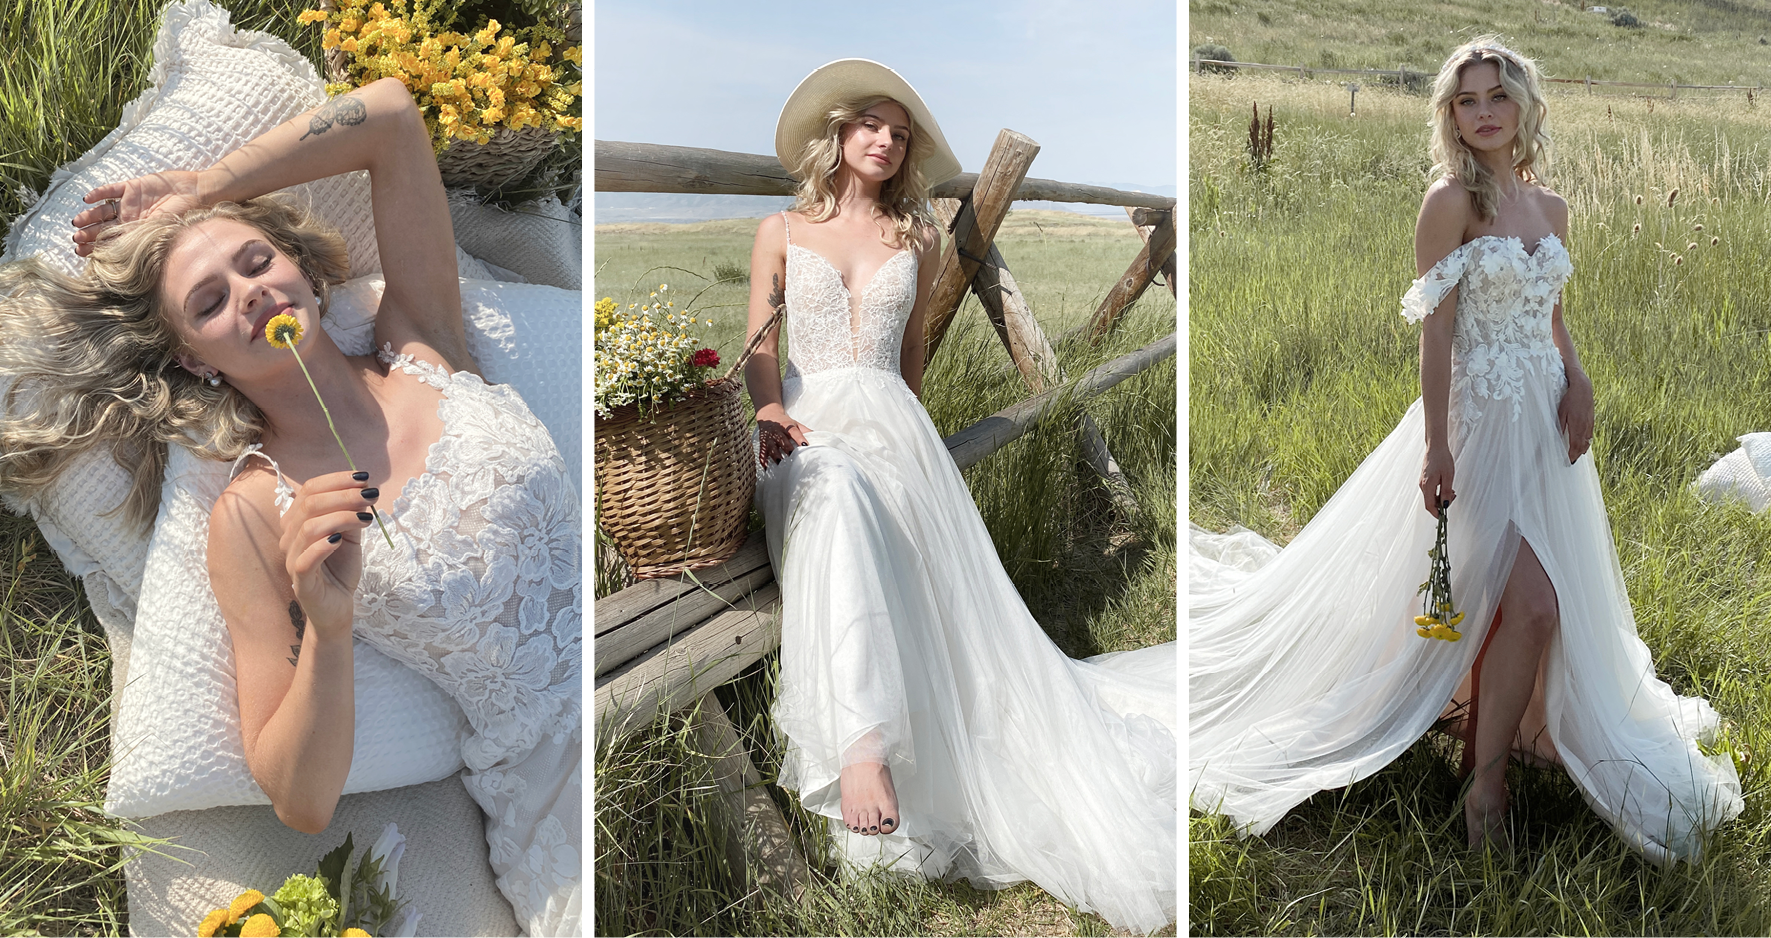 Brides in a Field Wearing Cottagecore Wedding Dresses by Maggie Sottero